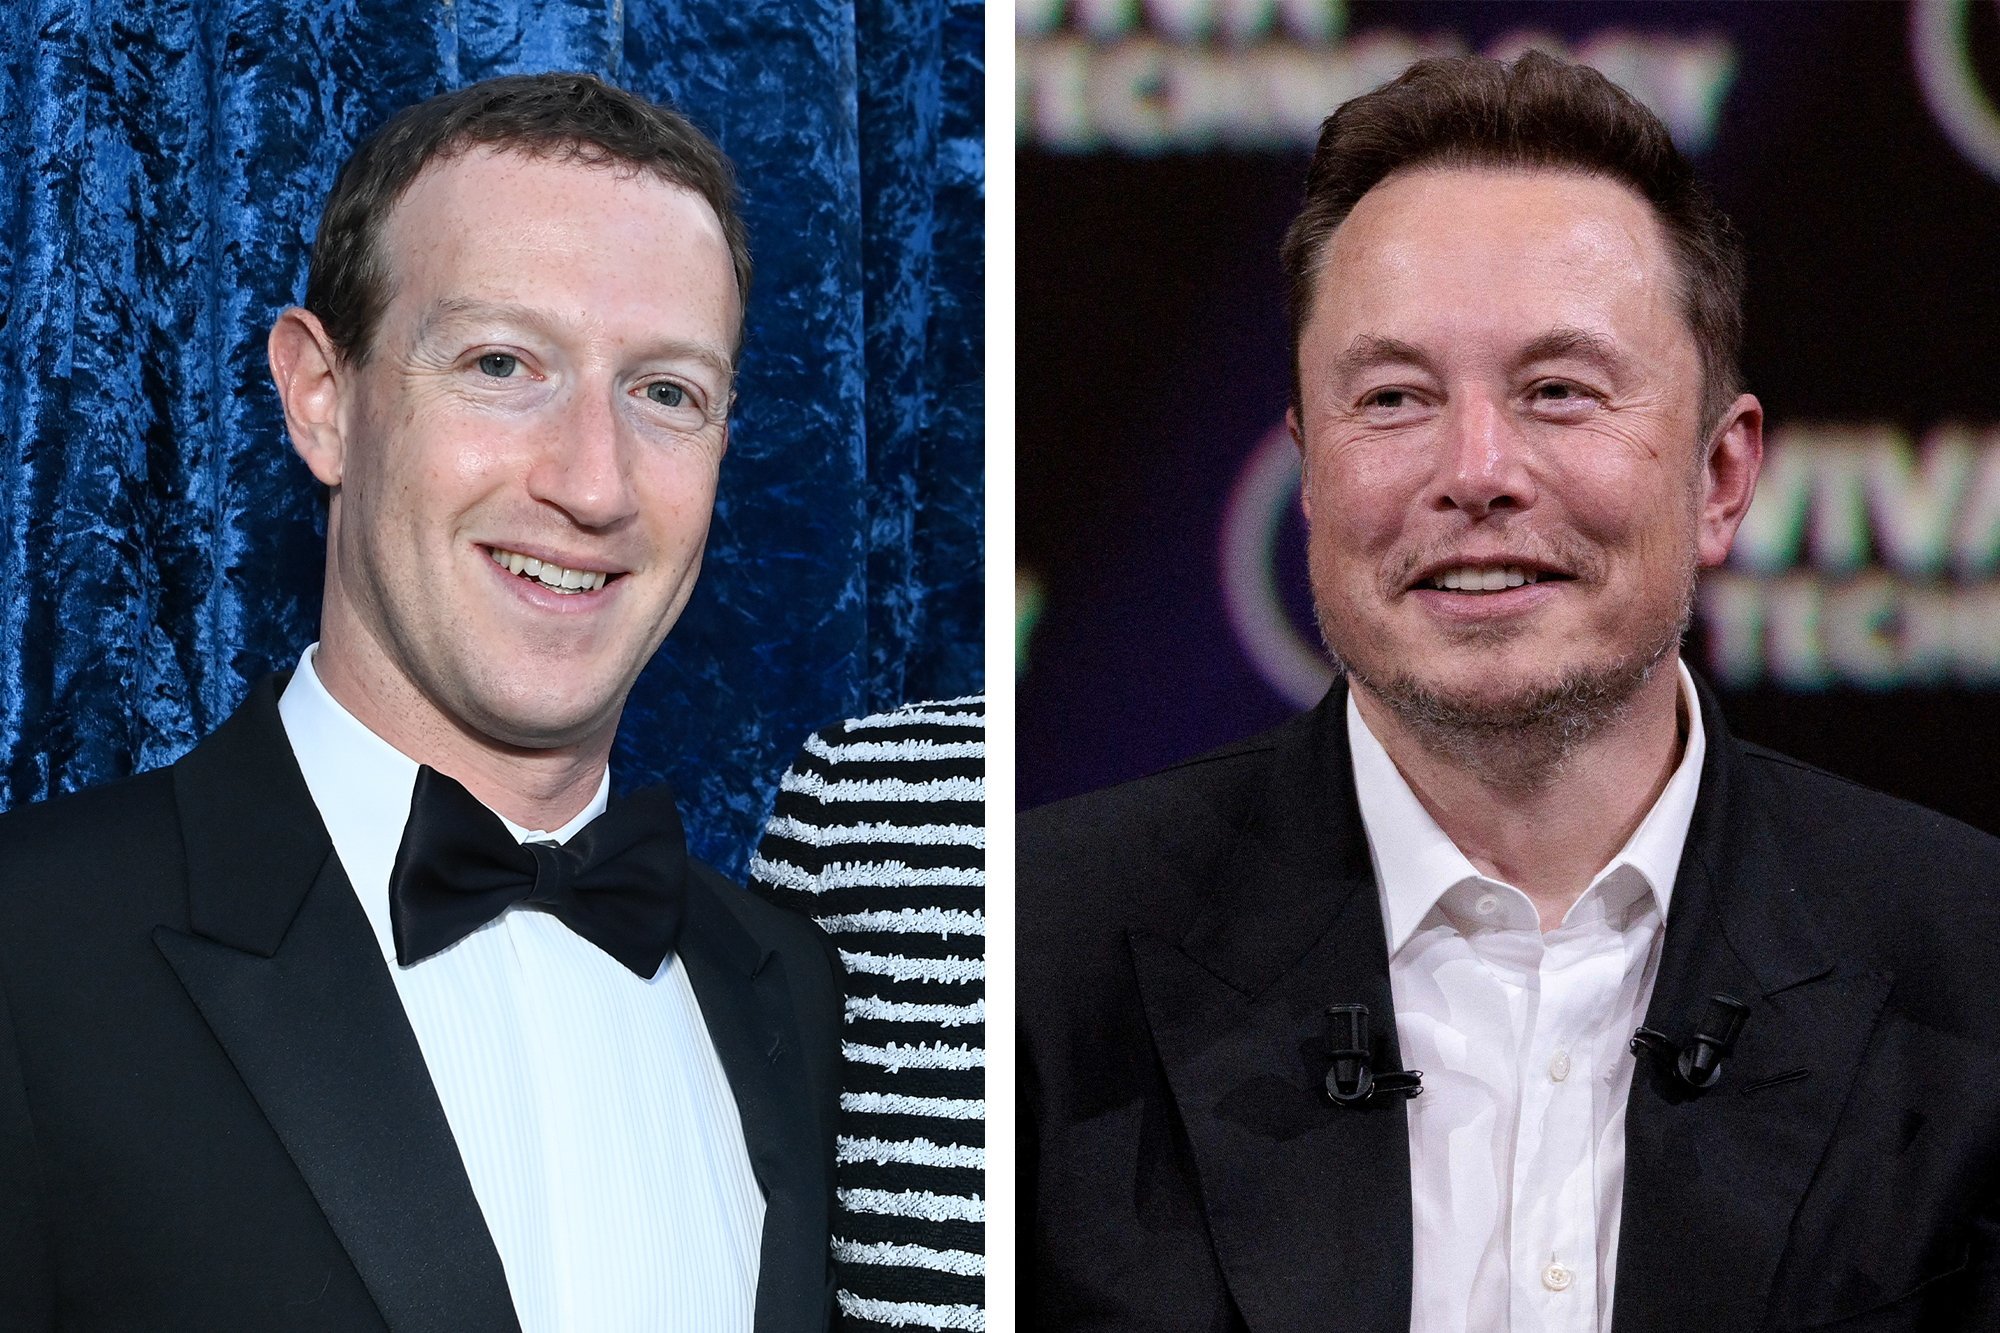 These Tech Billionaires Want to Fight